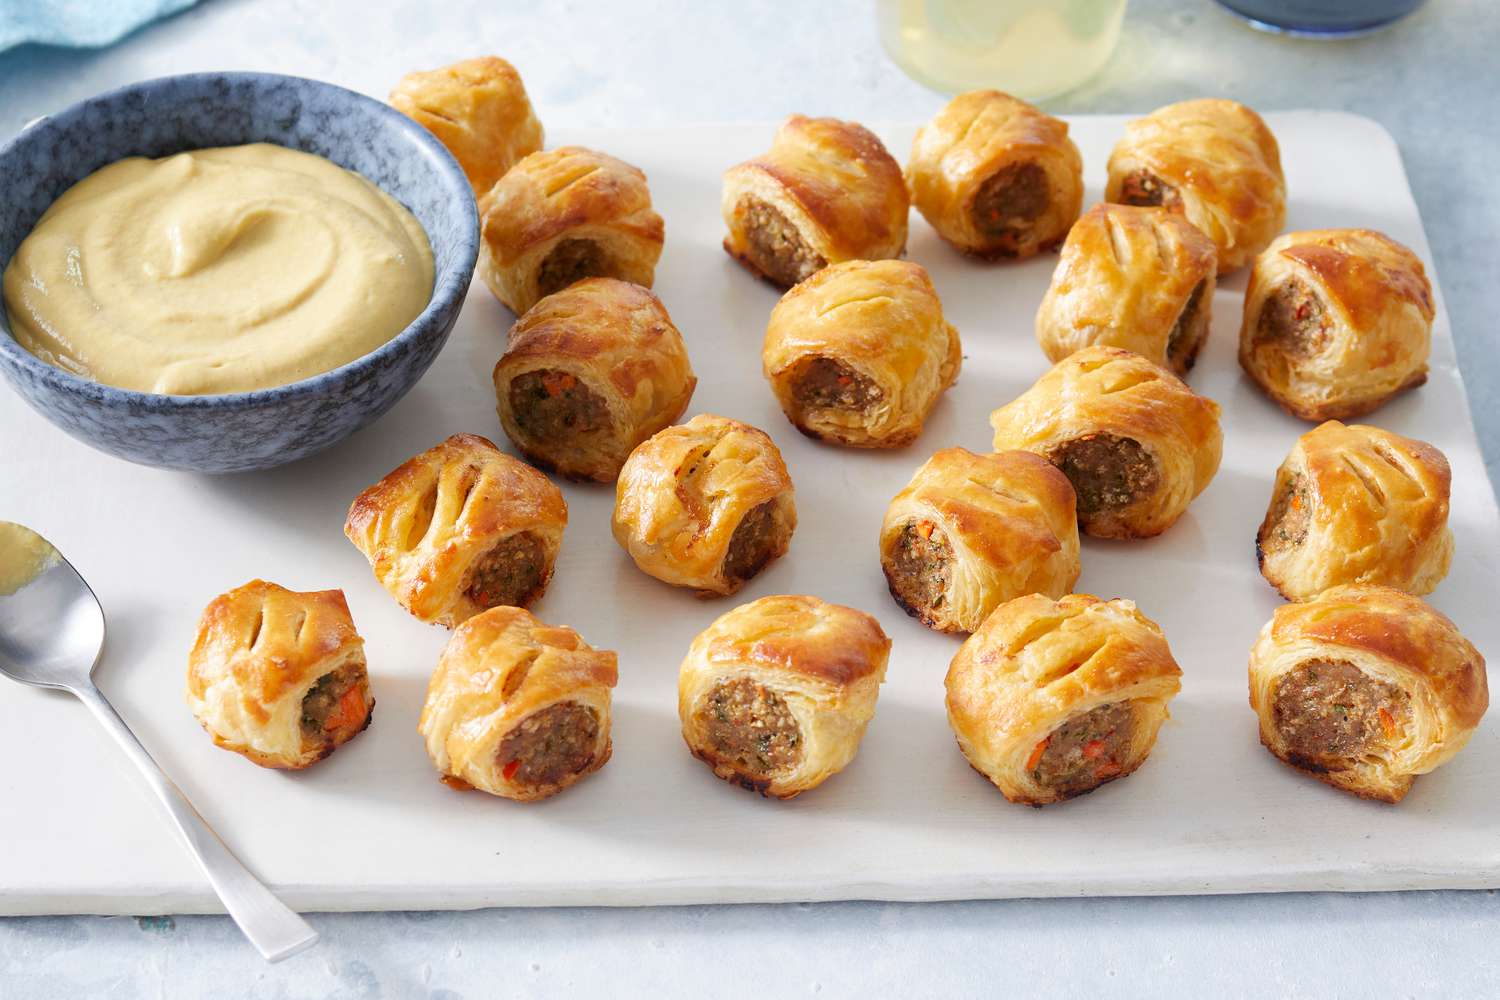 A delicious sausage roll with golden, flaky pastry filled with seasoned sausage meat, served on a wooden board.